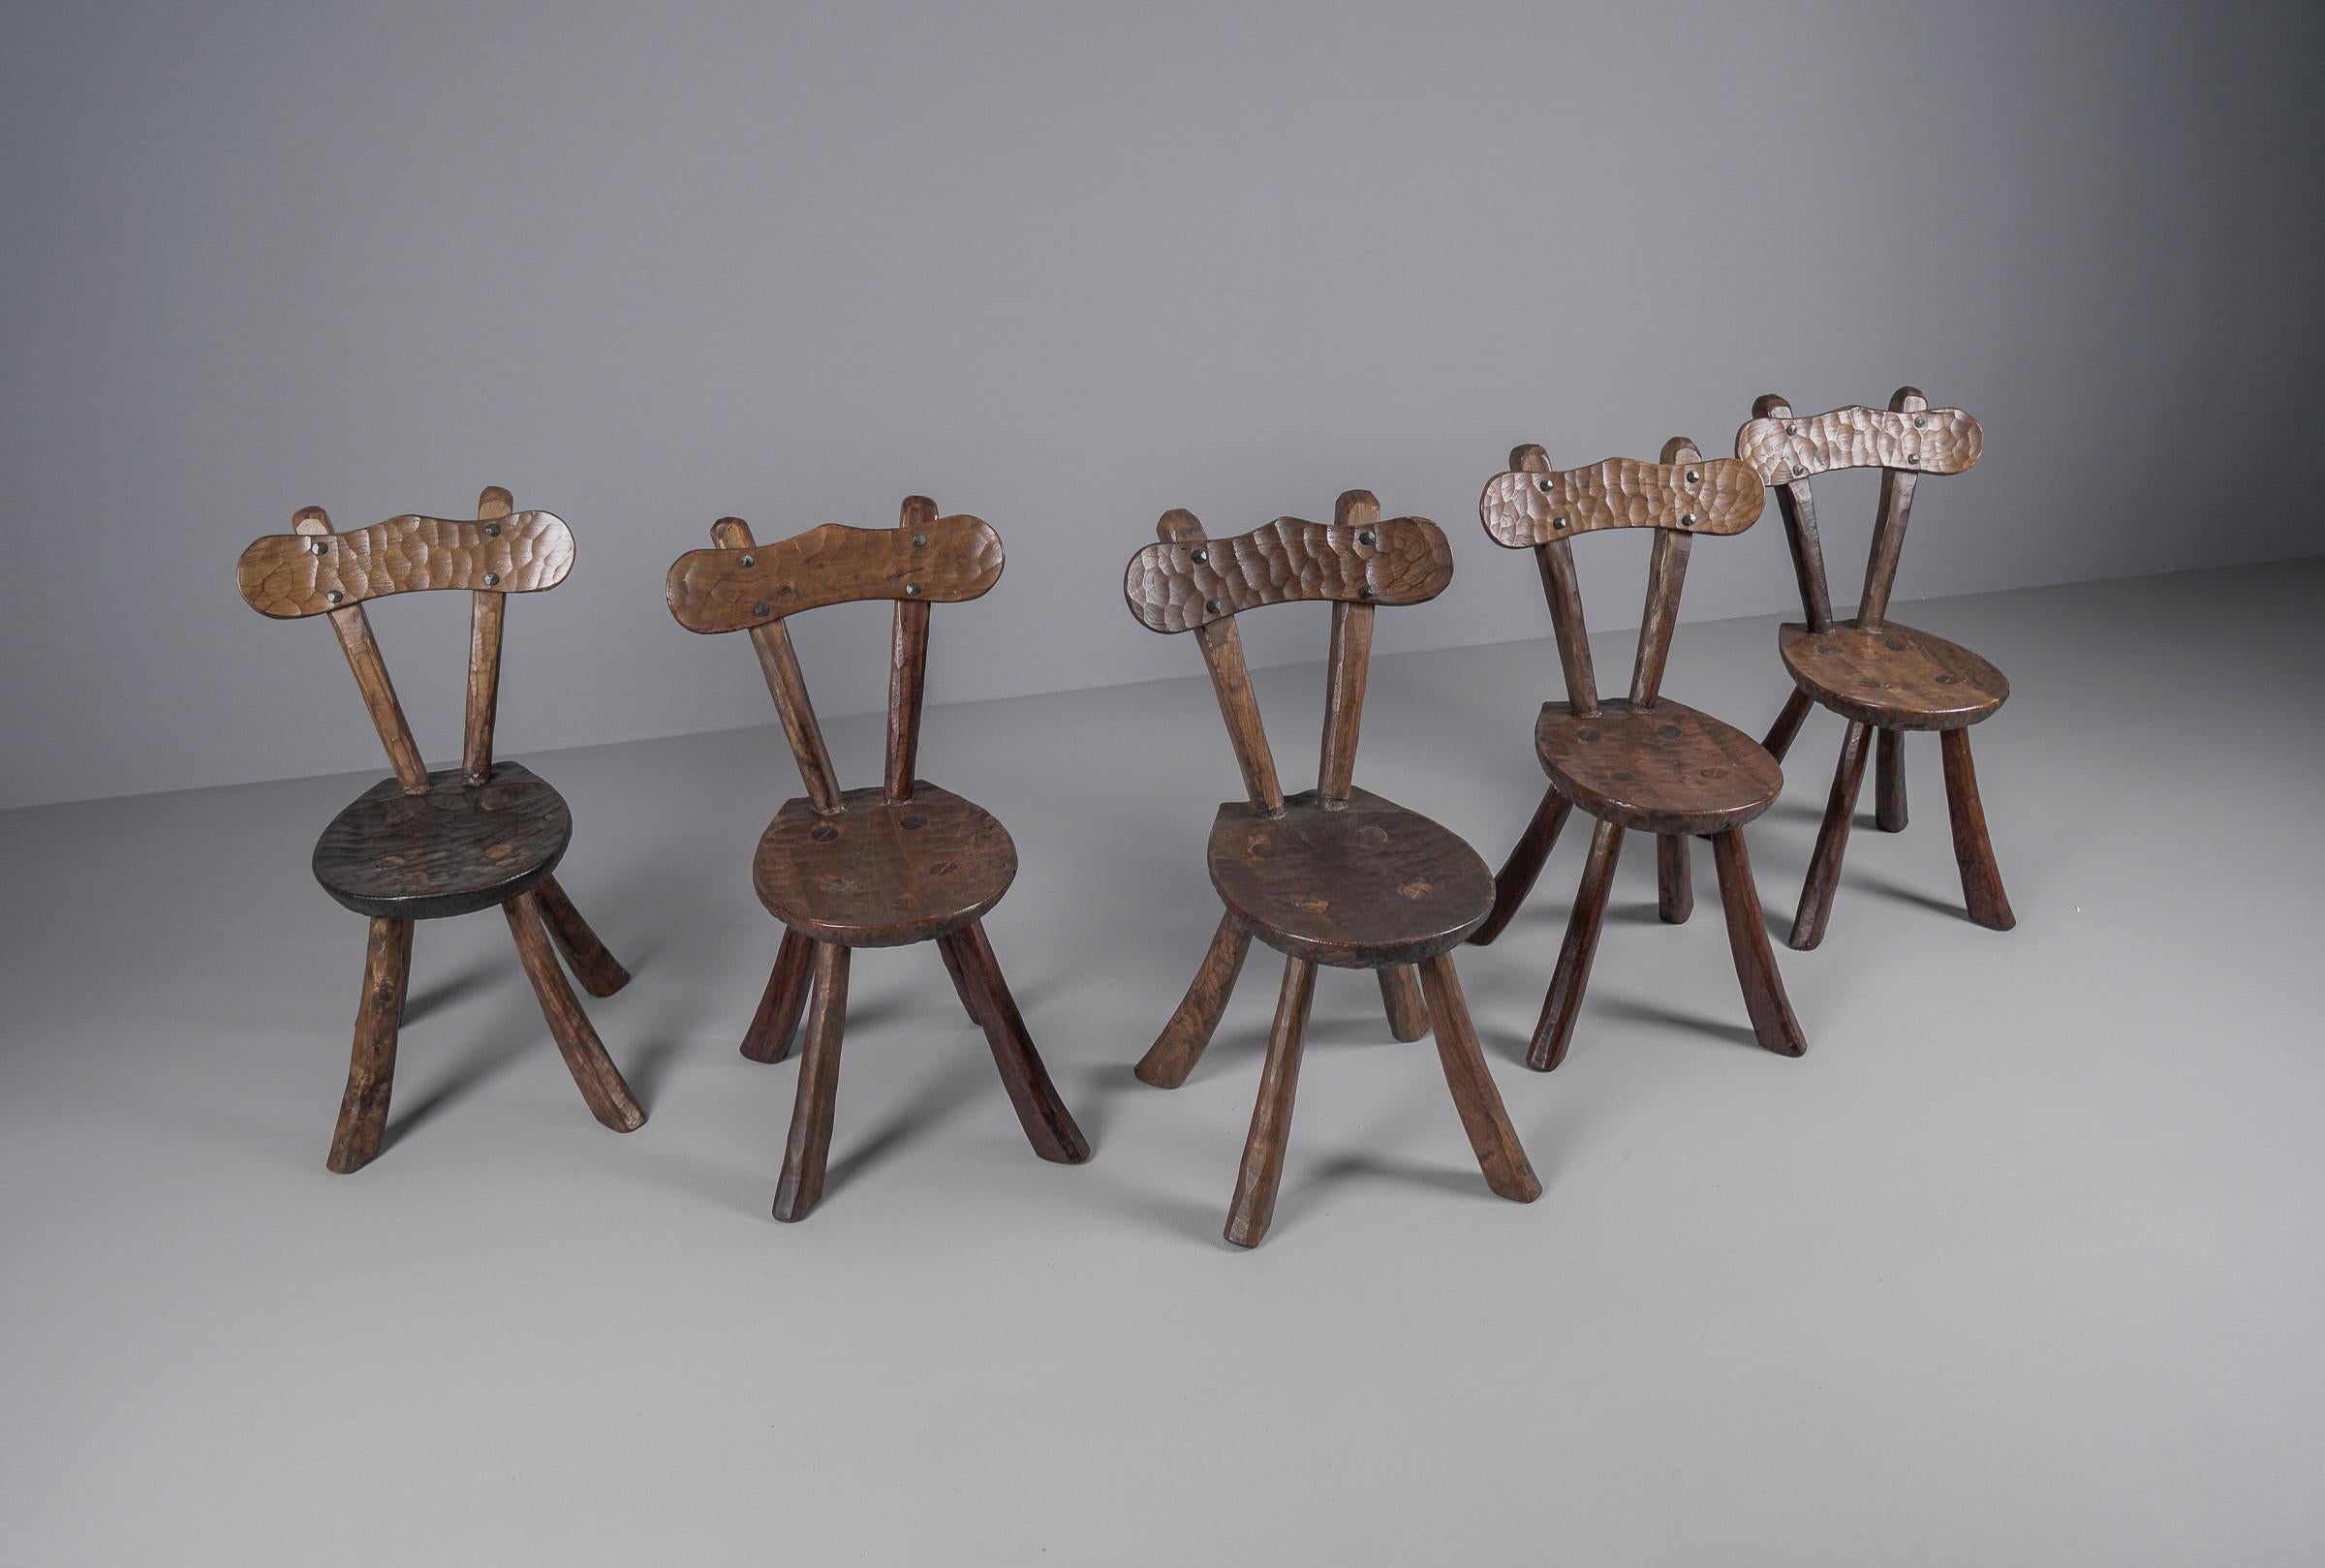 Set of 5 Brutalist Rustic Modern Sculptured Chairs i. t. Style of Alexandre Noll In Good Condition For Sale In Nürnberg, Bayern